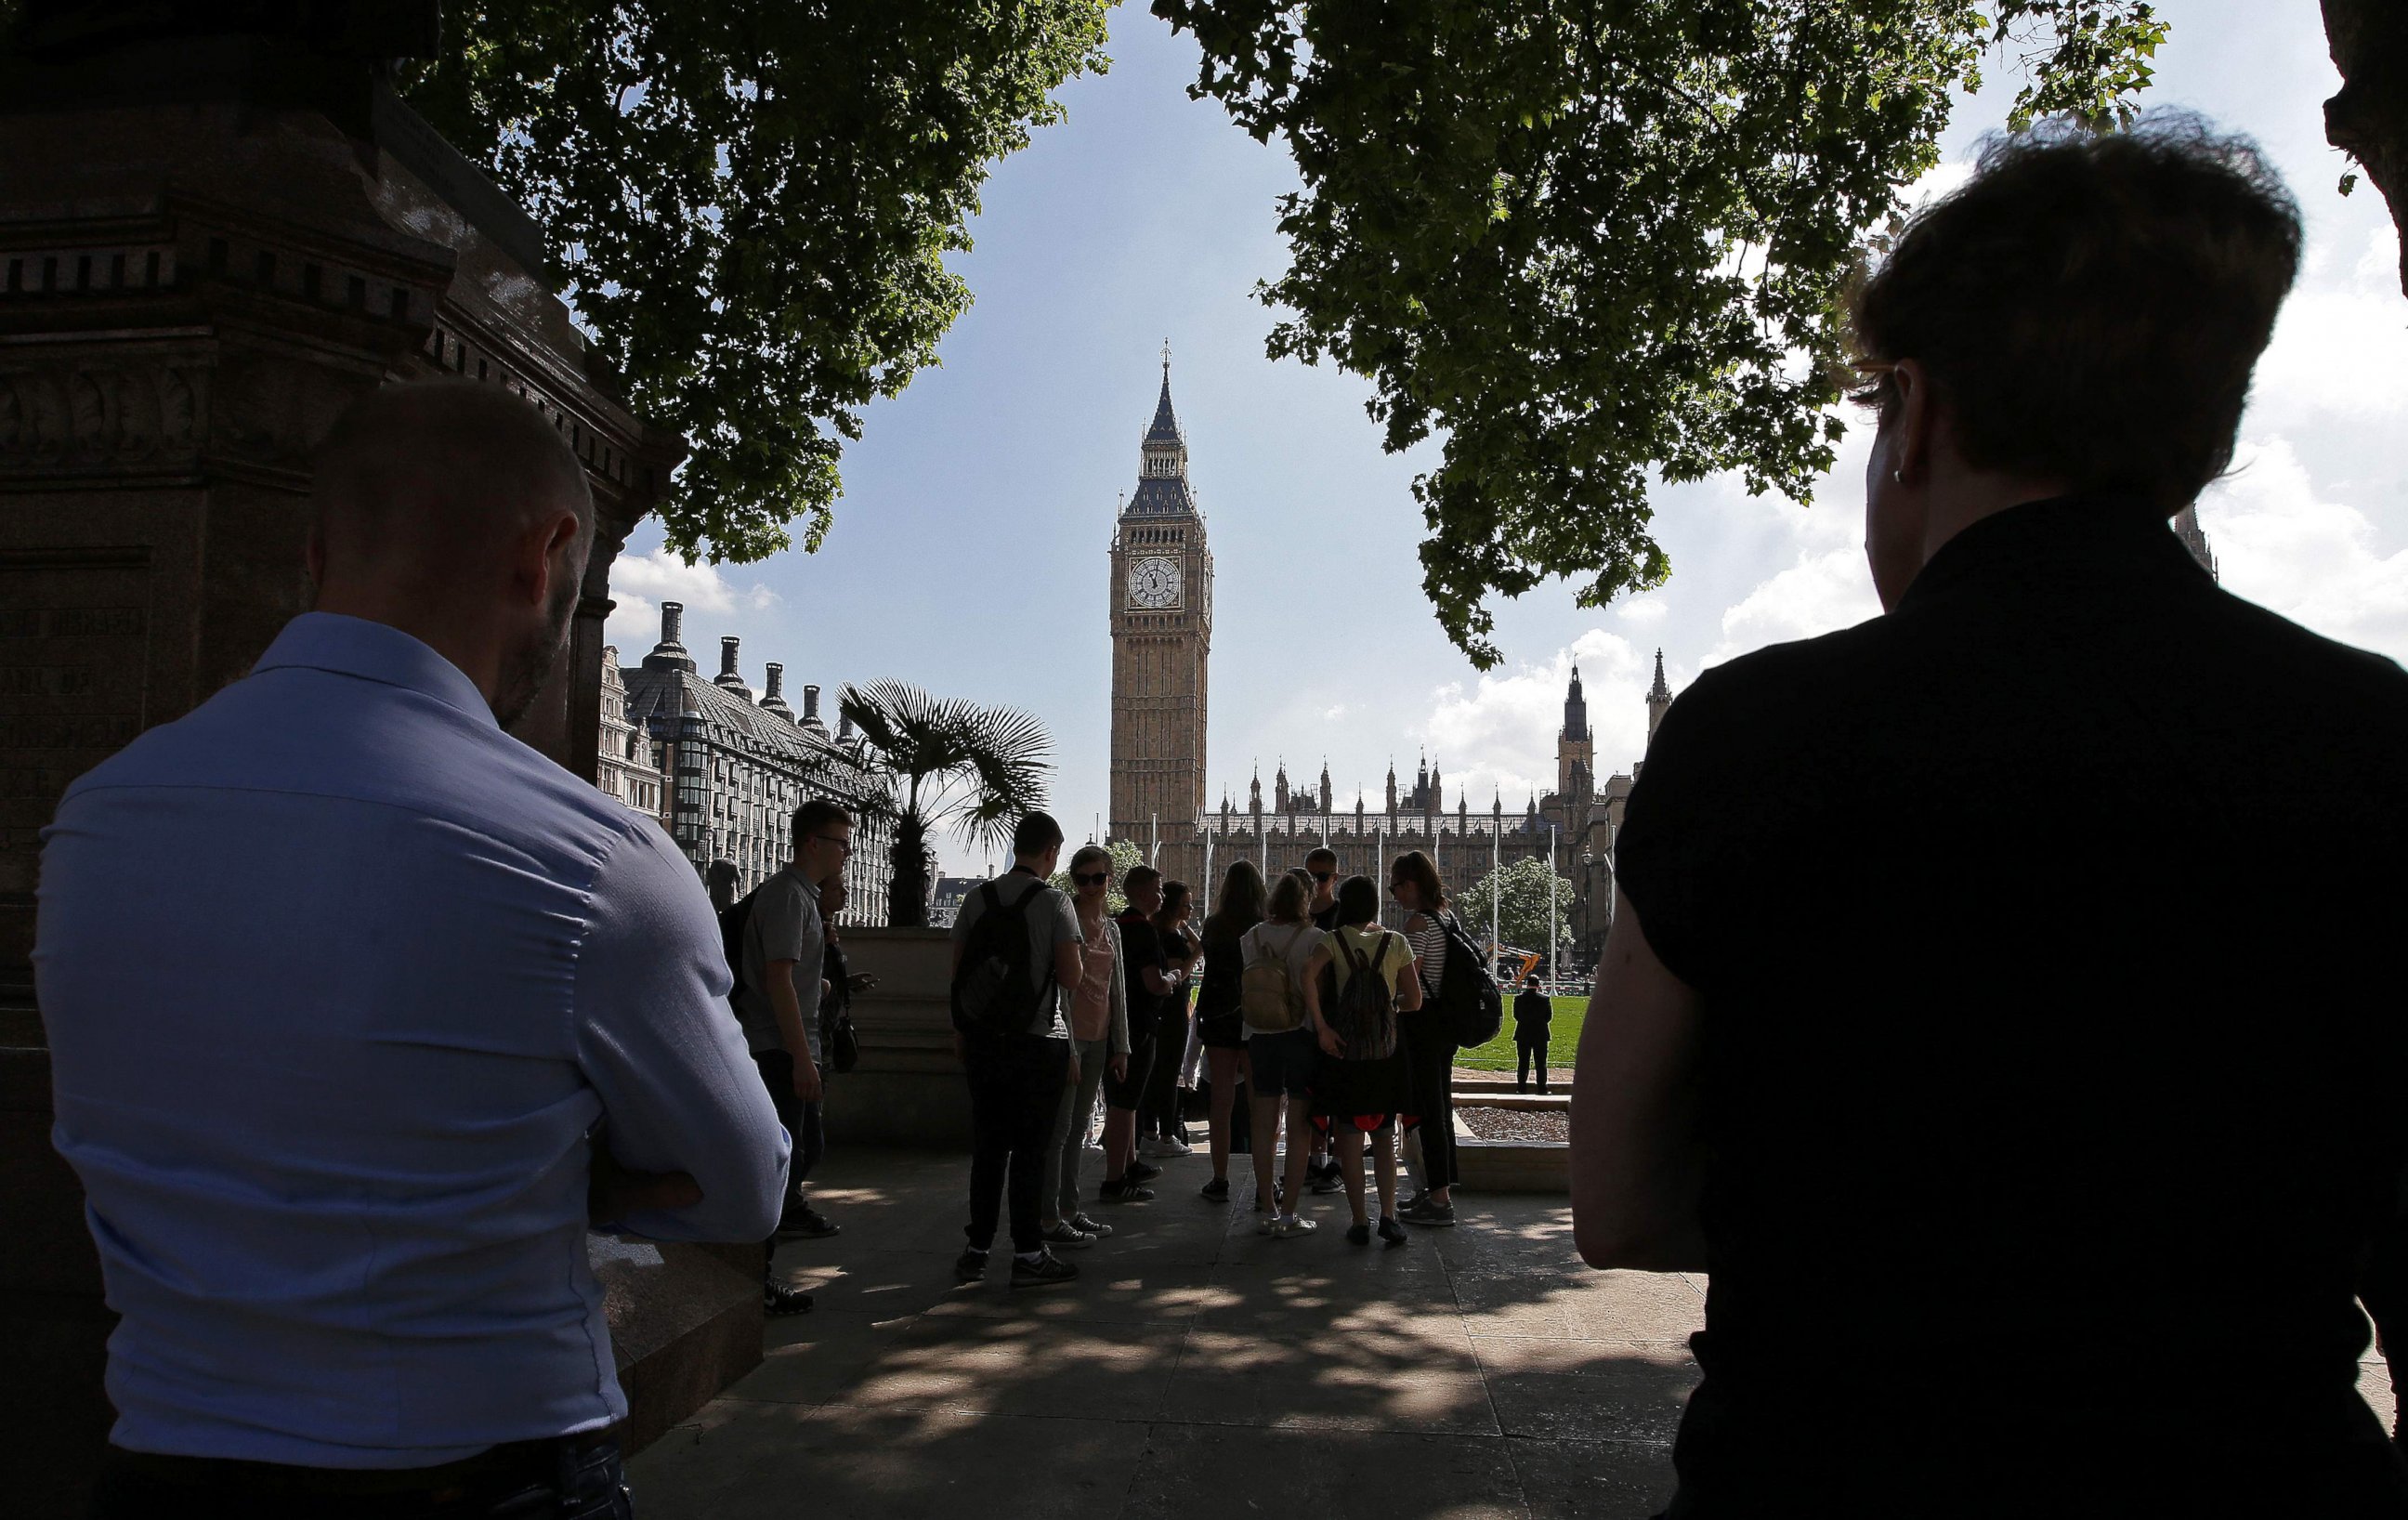 PHOTO: People stop to observe a minute's silence in Parliament Square, Westminster in central London, on May 25, 2017, as a mark of respect to the victims of the May 22 terror attack at the Manchester Arena.